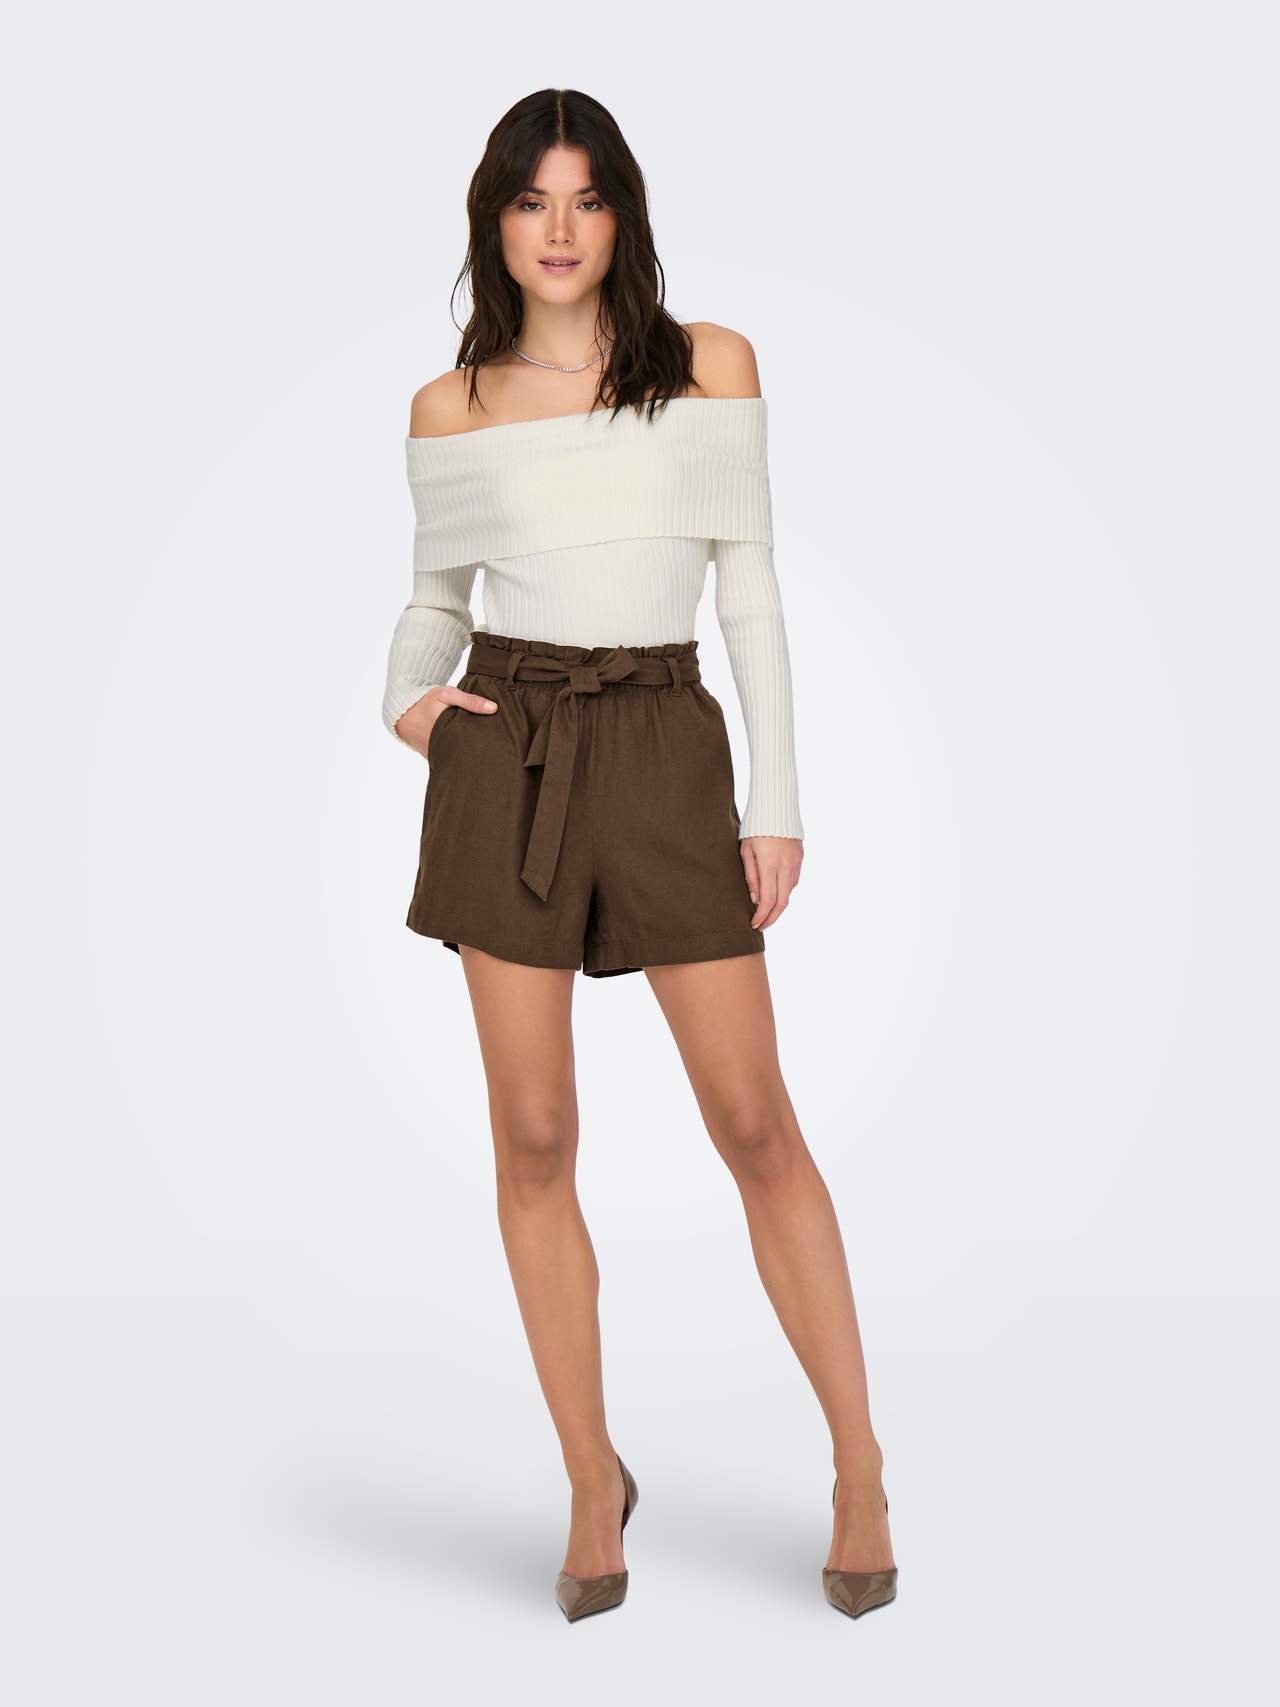 ONLY Regular fit Mid waist Shorts -Carafe - 15225921